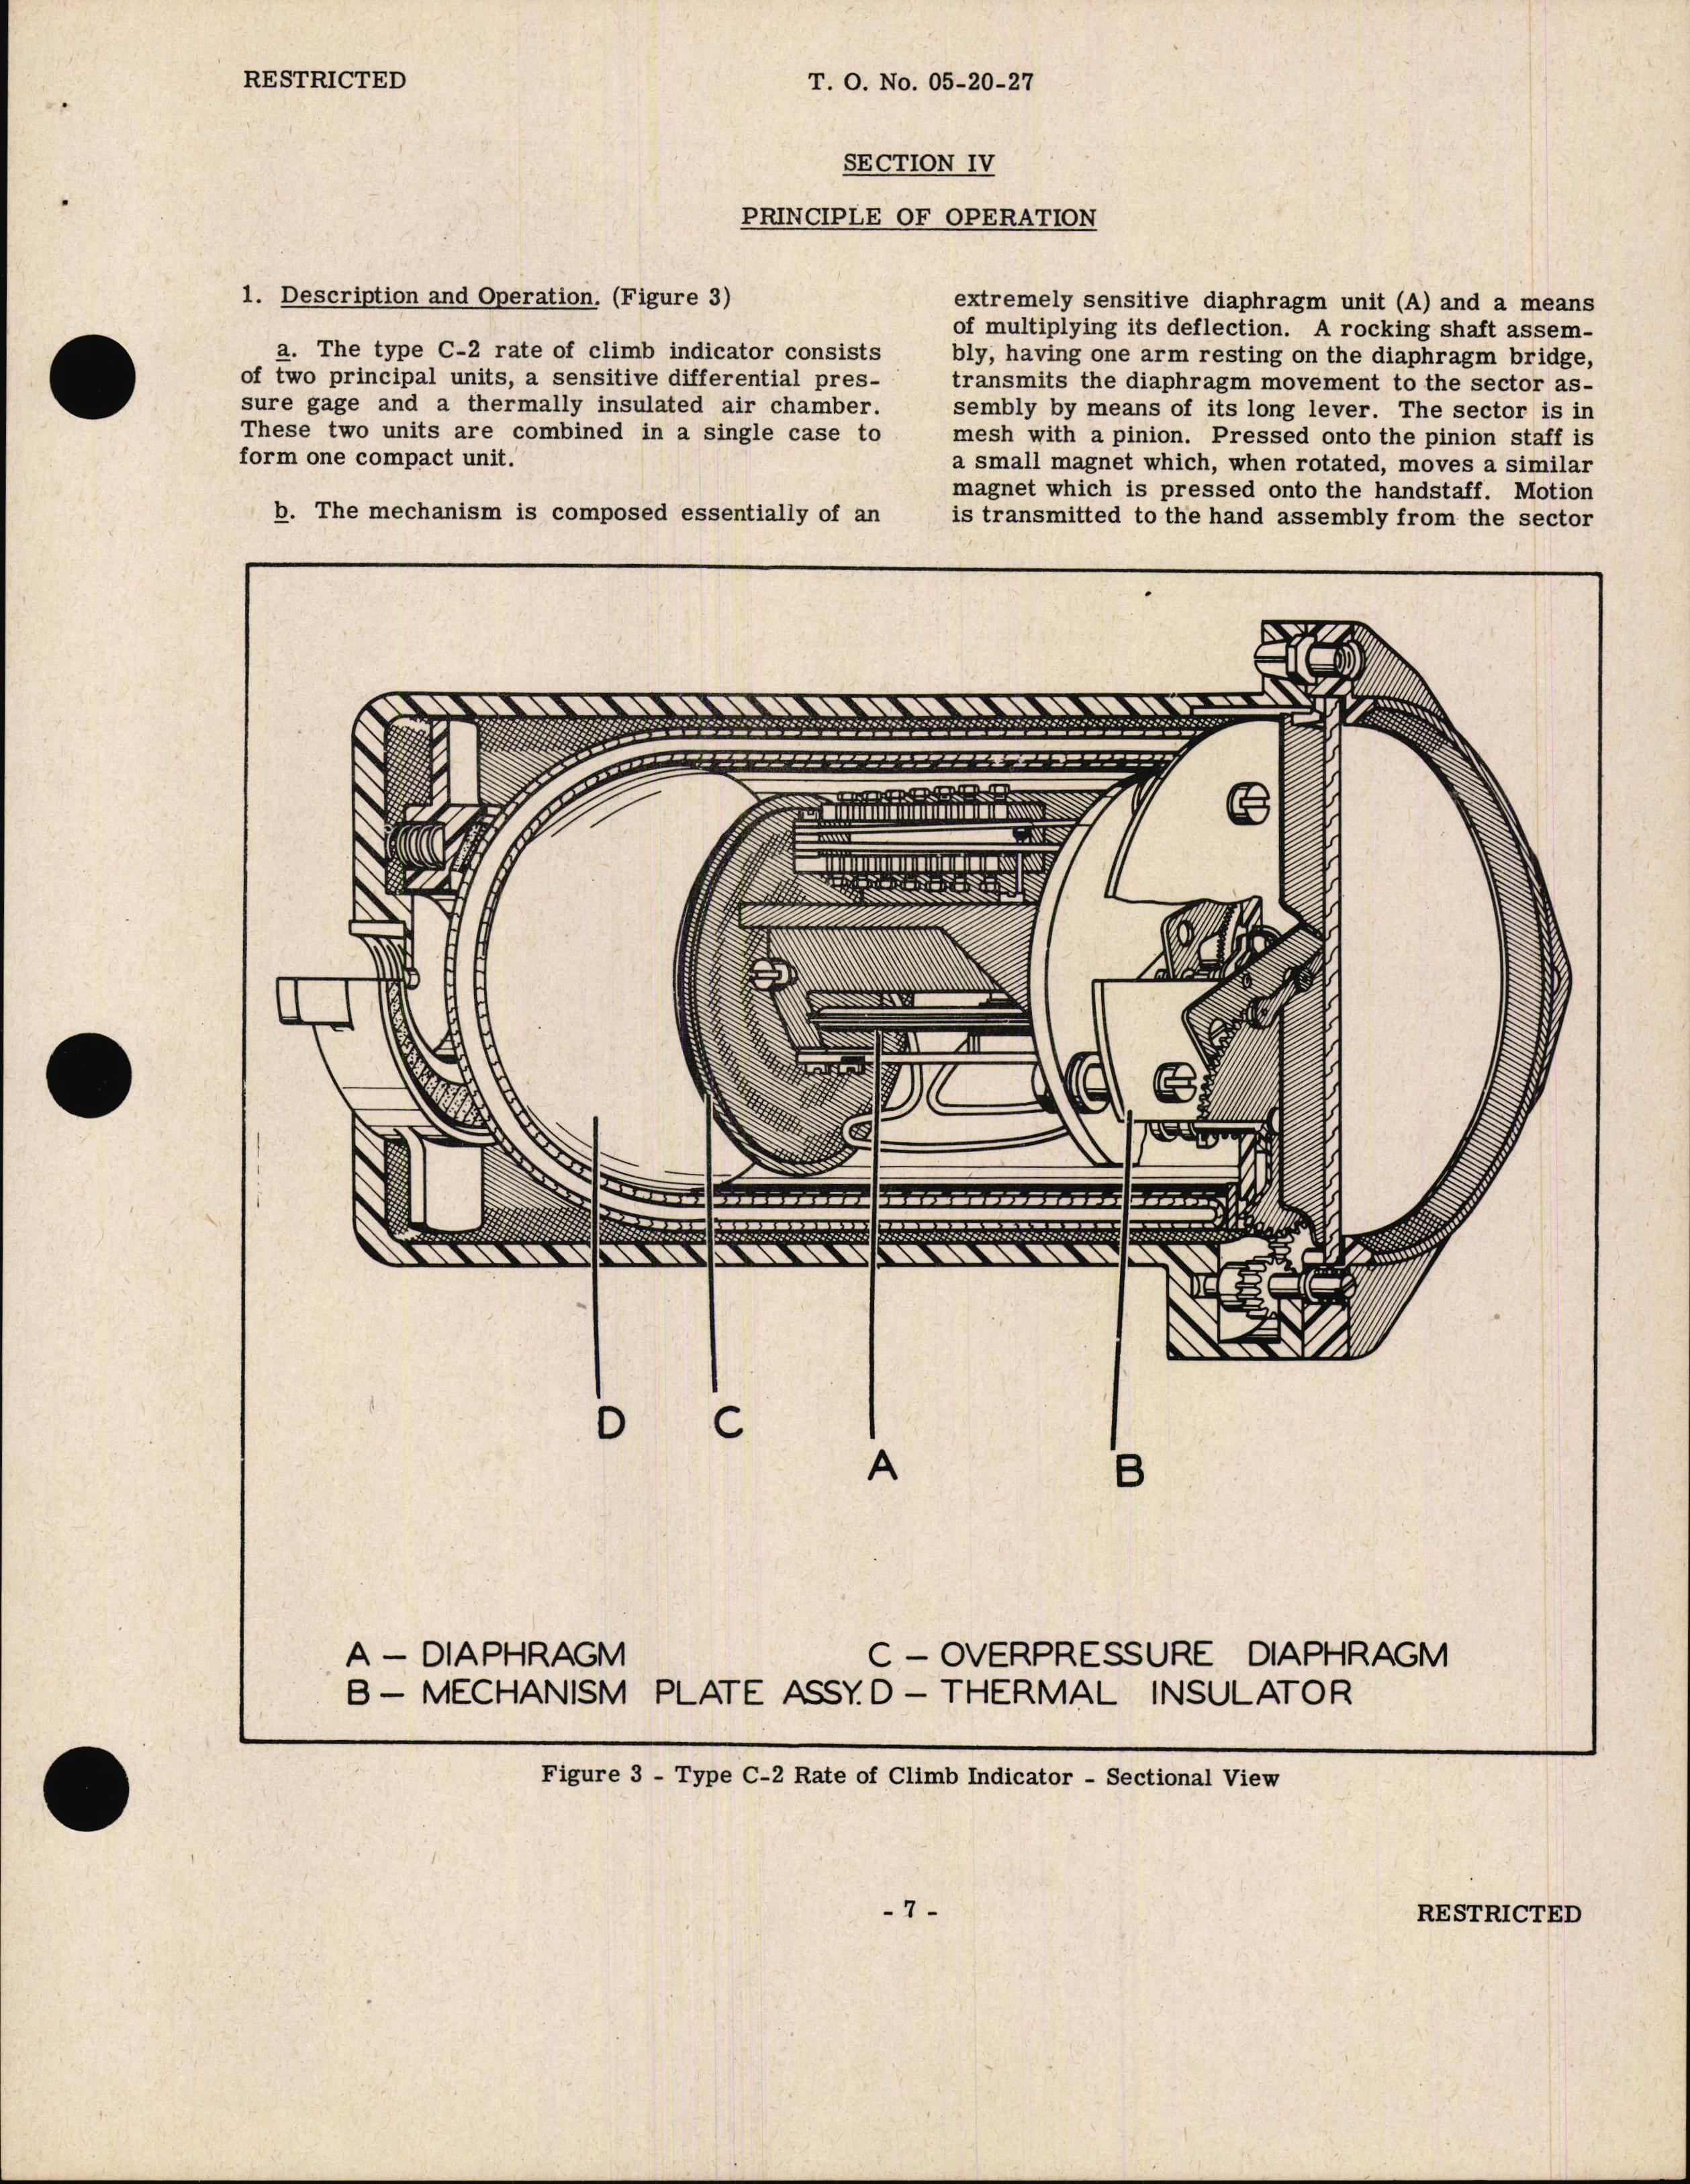 Sample page 9 from AirCorps Library document: Handbook of Instructions with Parts Catalog for Type C-2 Rate of Climb Indicator